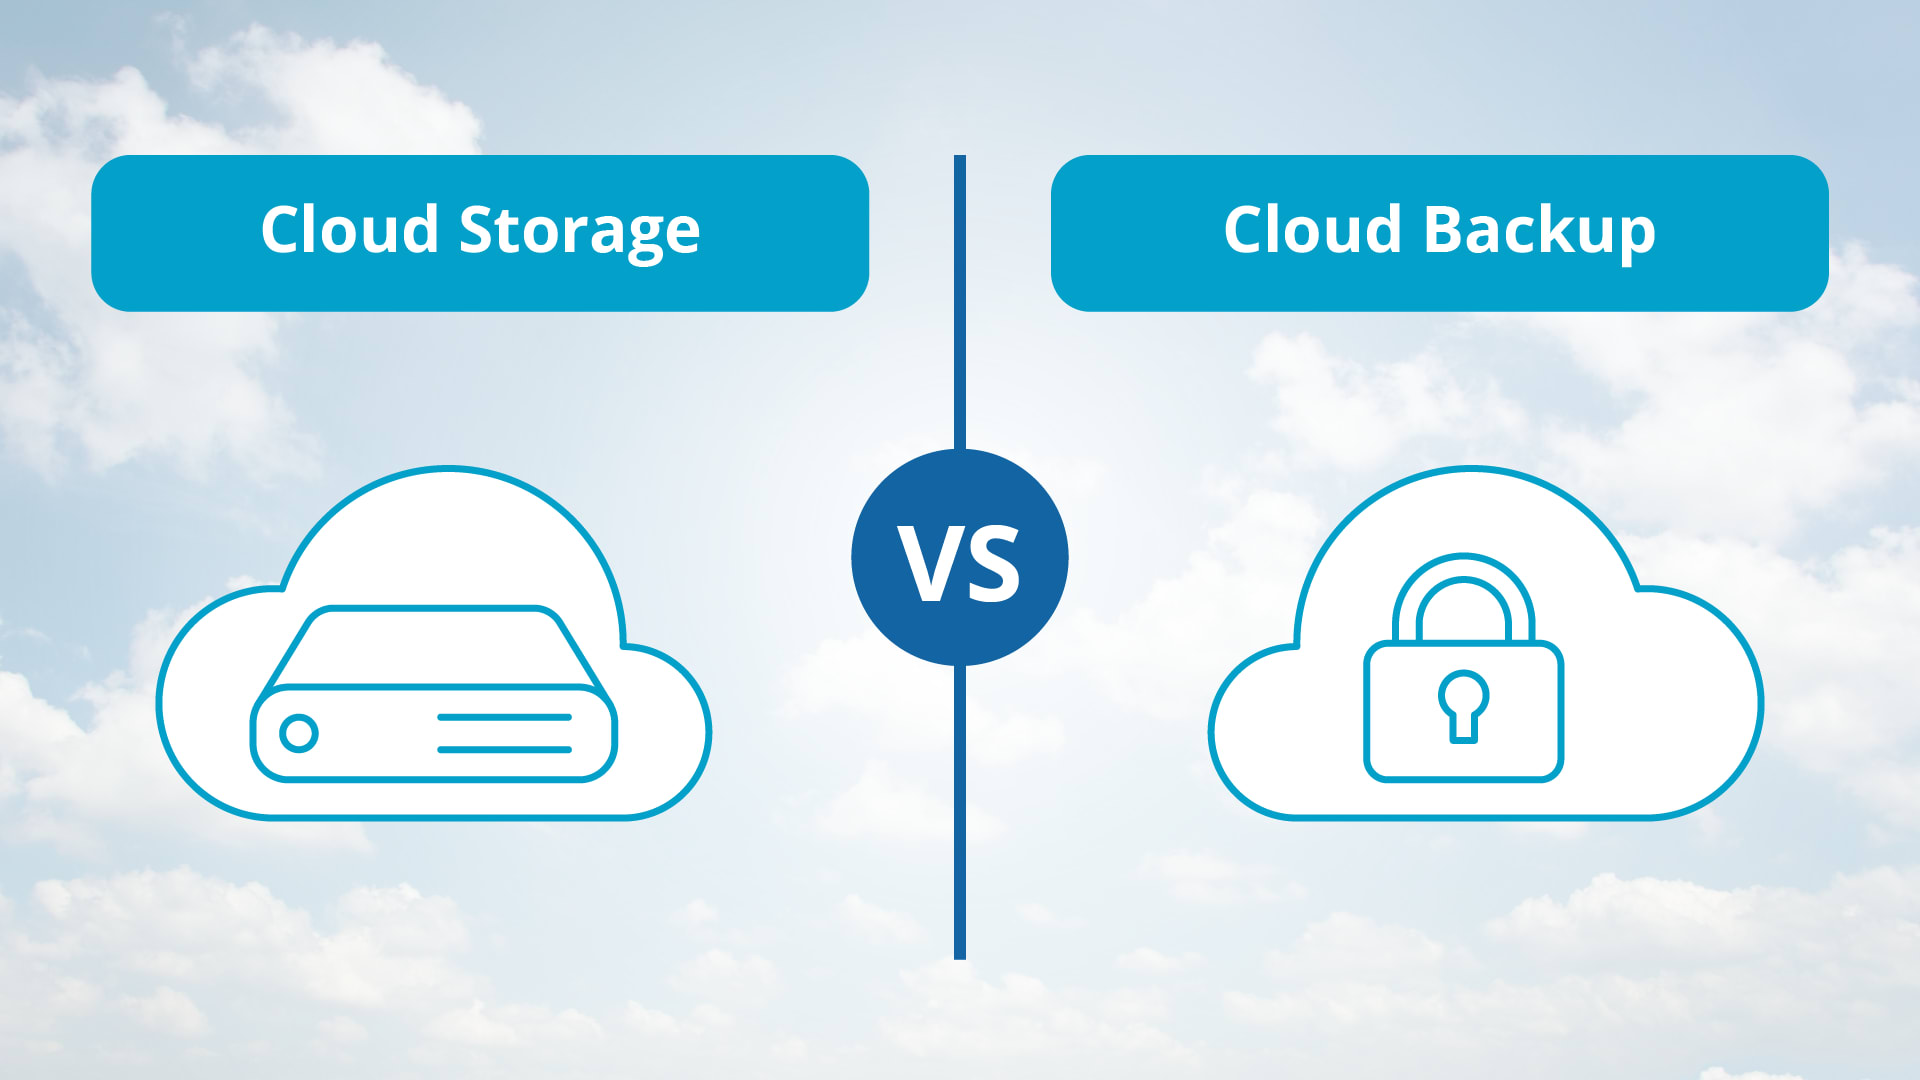 Cloud backup vs cloud storage: What’s the difference?